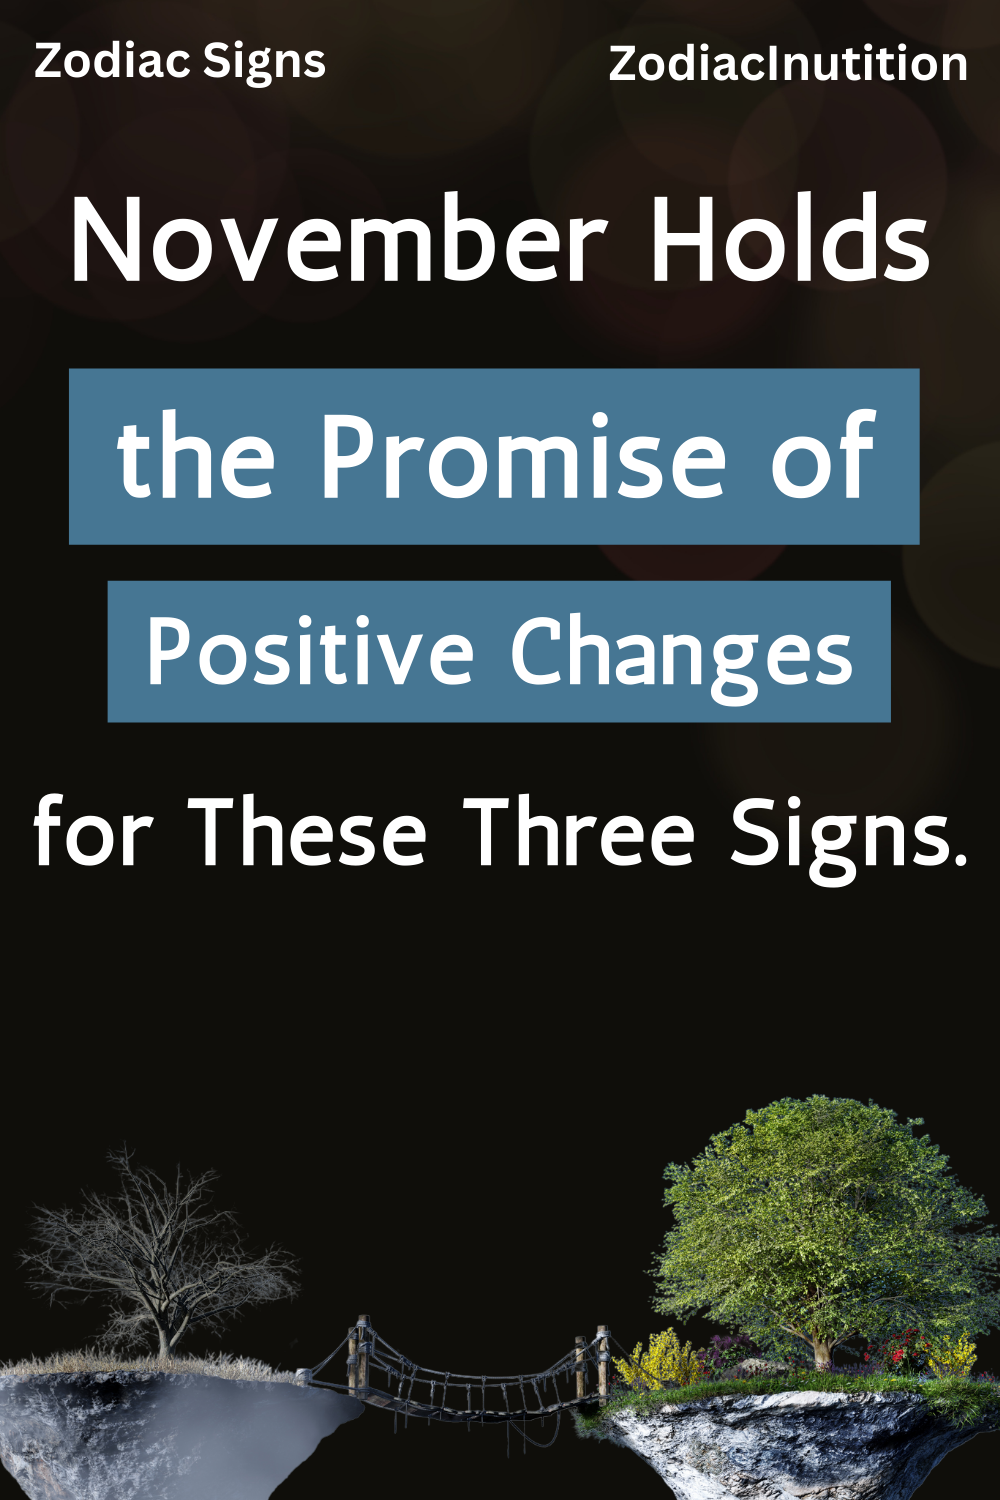 November Holds the Promise of Positive Changes for These Three Signs.